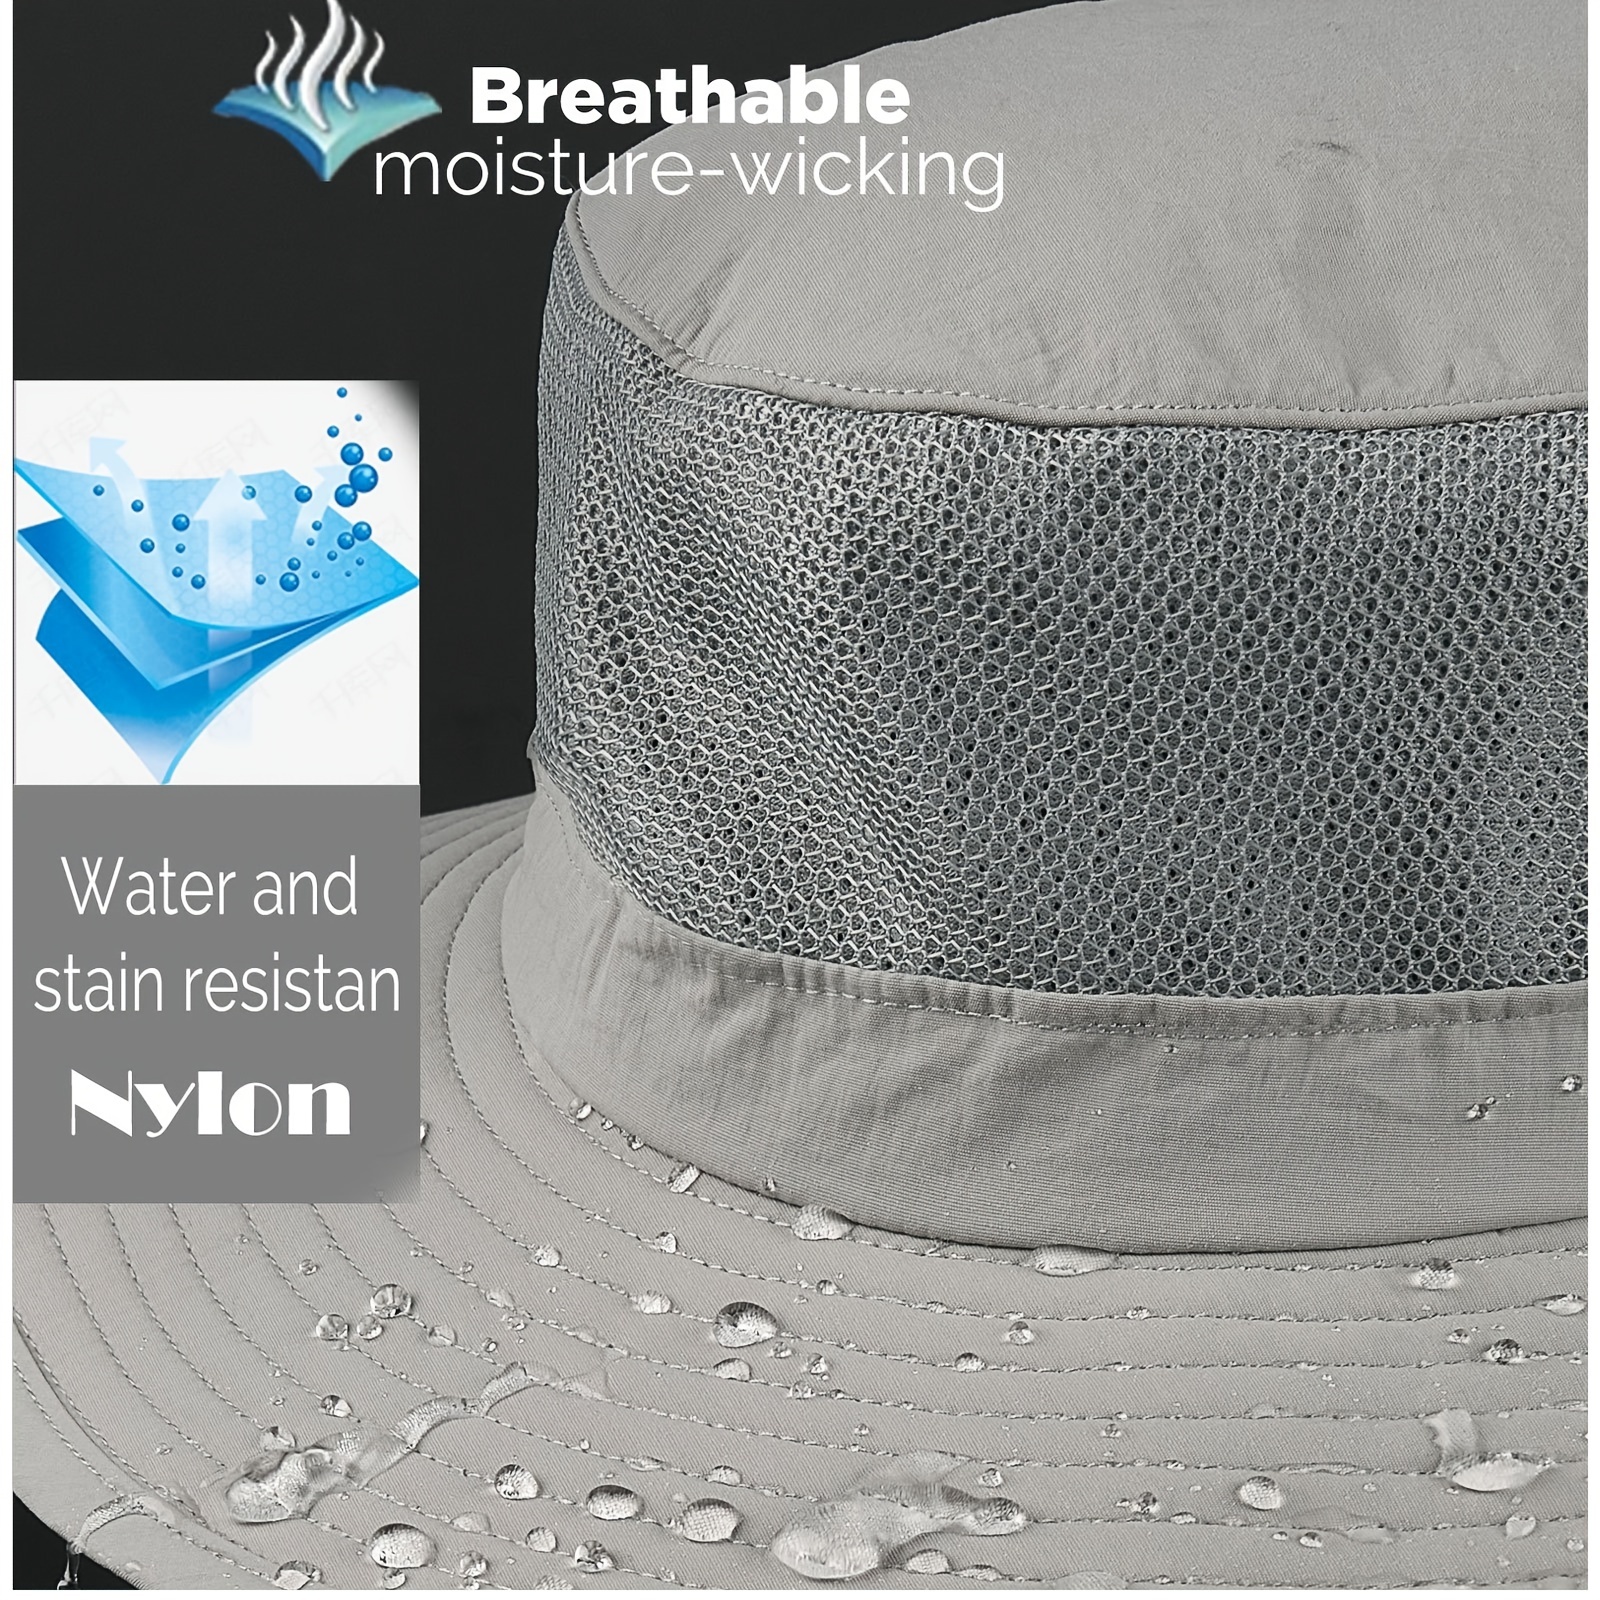 Breathable Sun Protection Hiking & Fishing Hat For Men & Women